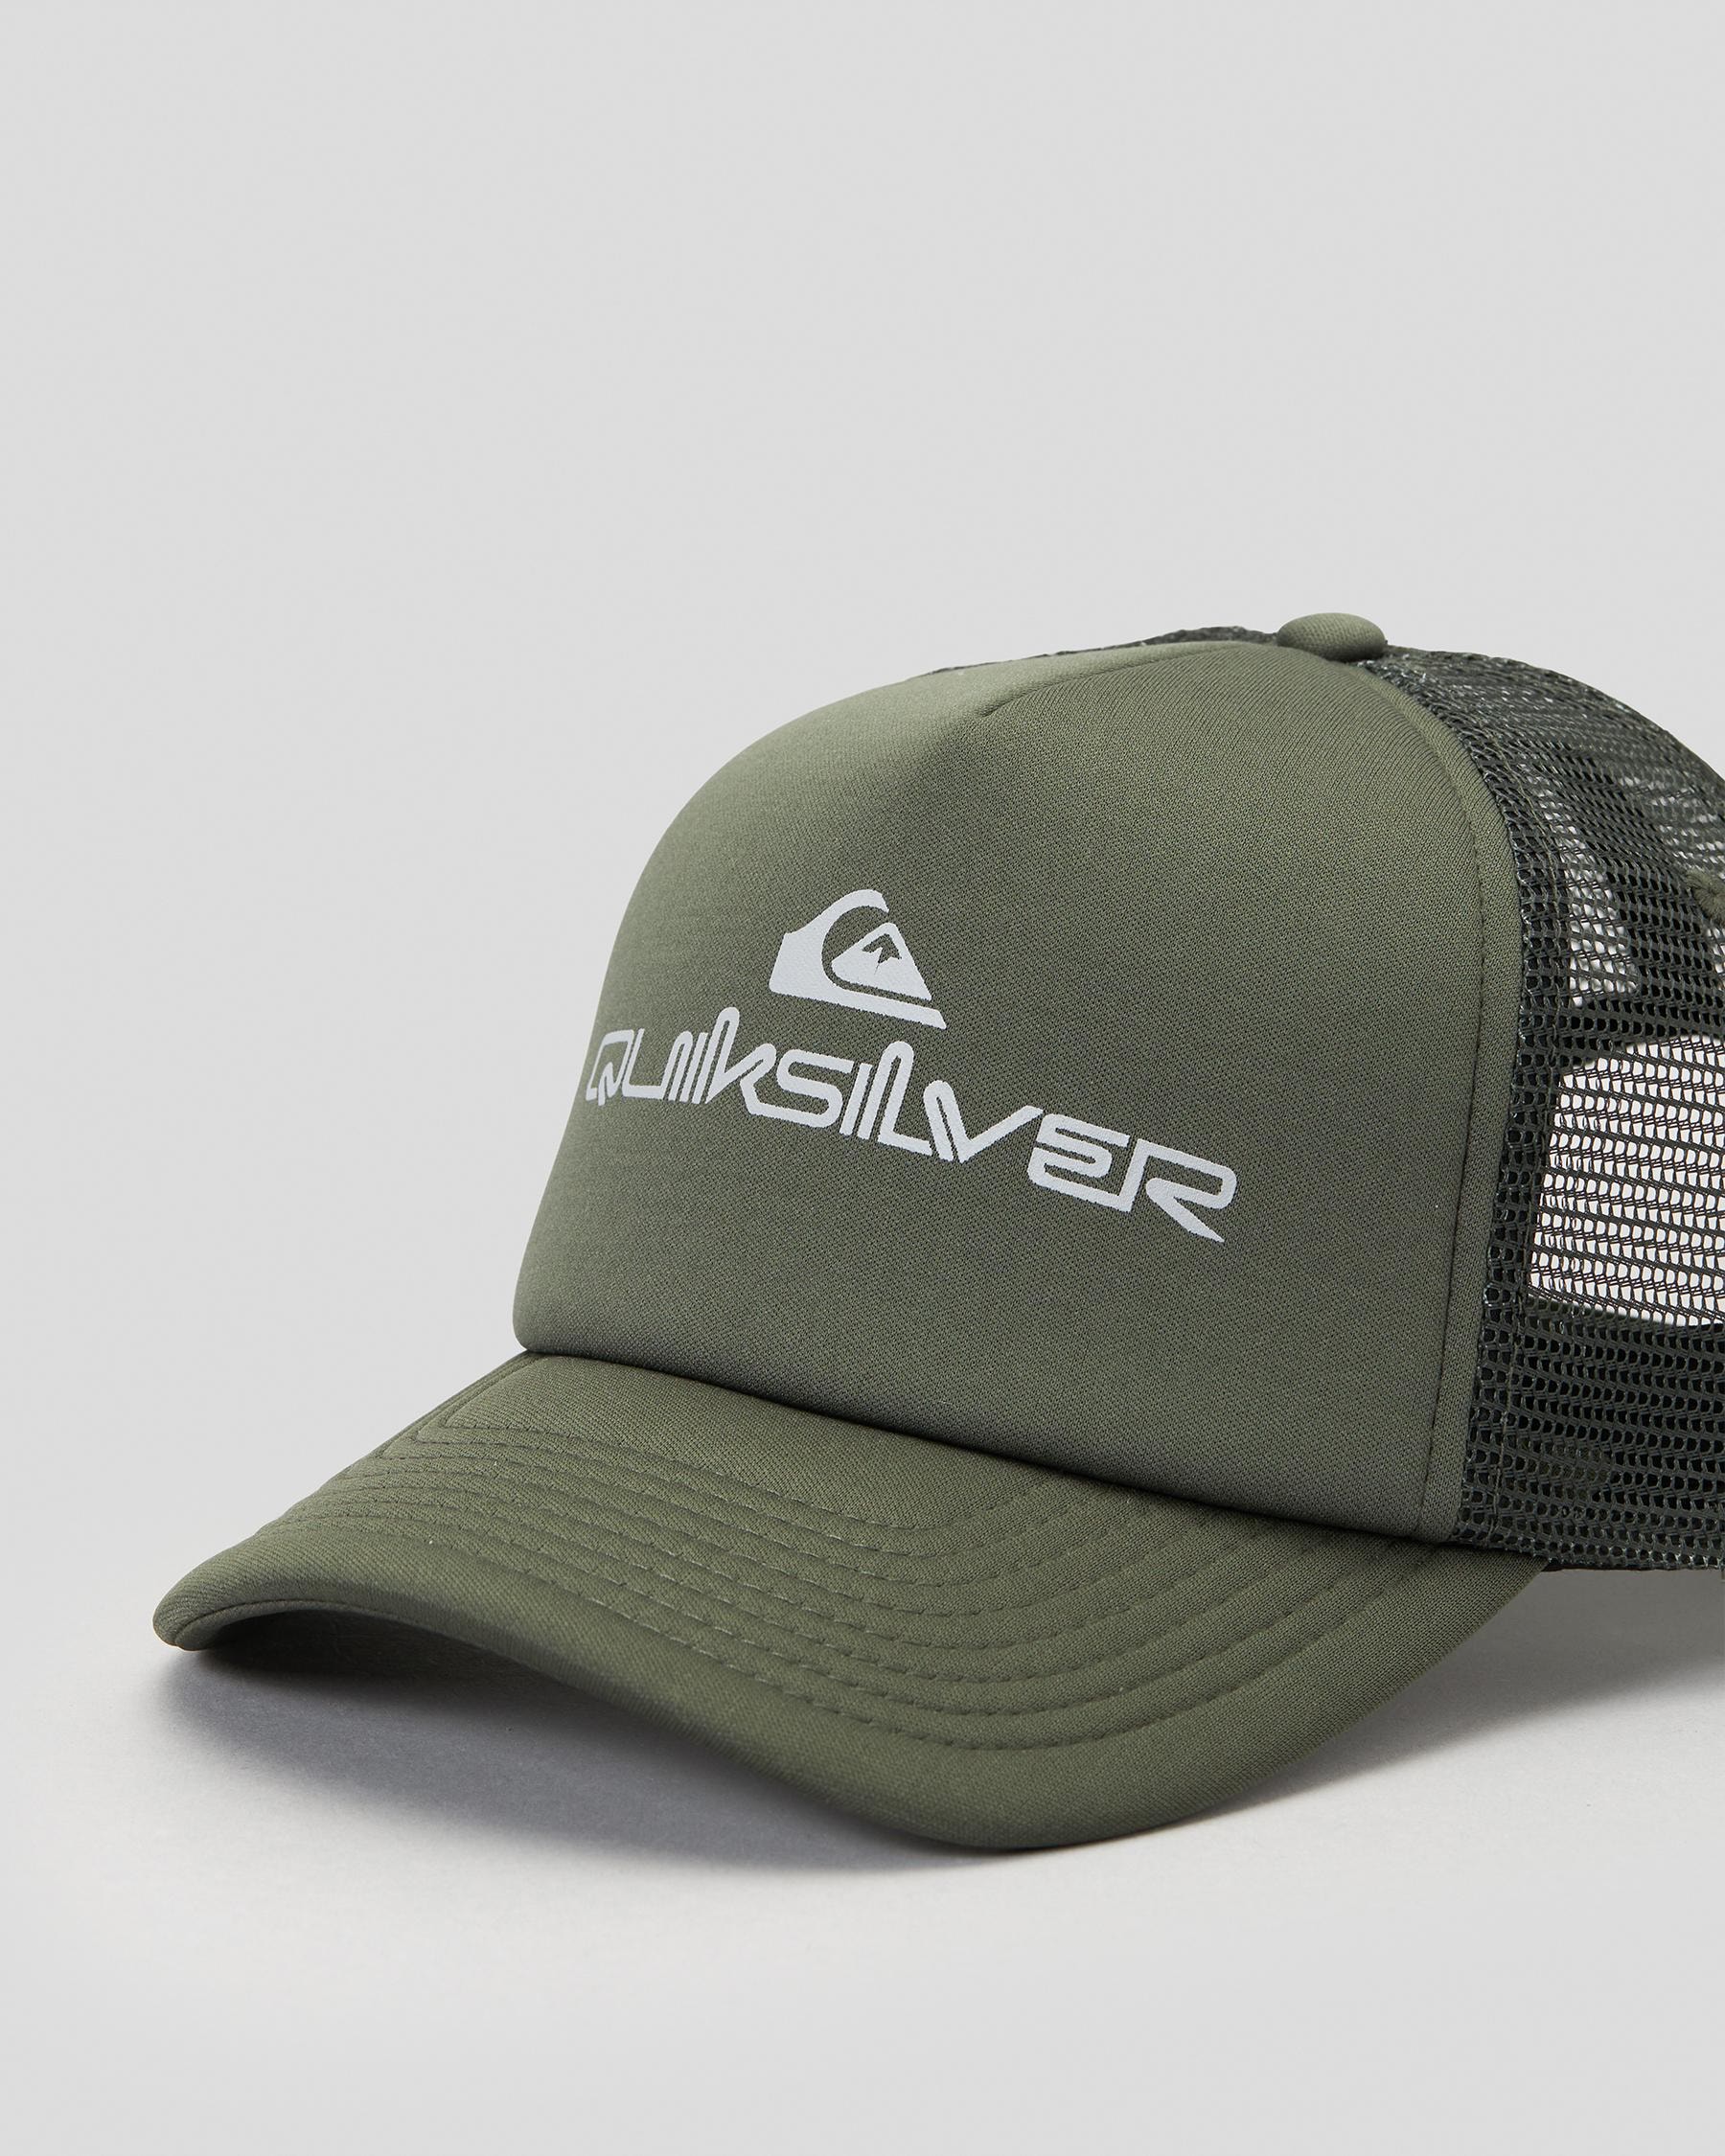 Quiksilver Omnistack Trucker Cap In Thyme - FREE* Shipping & Easy Returns -  City Beach United States